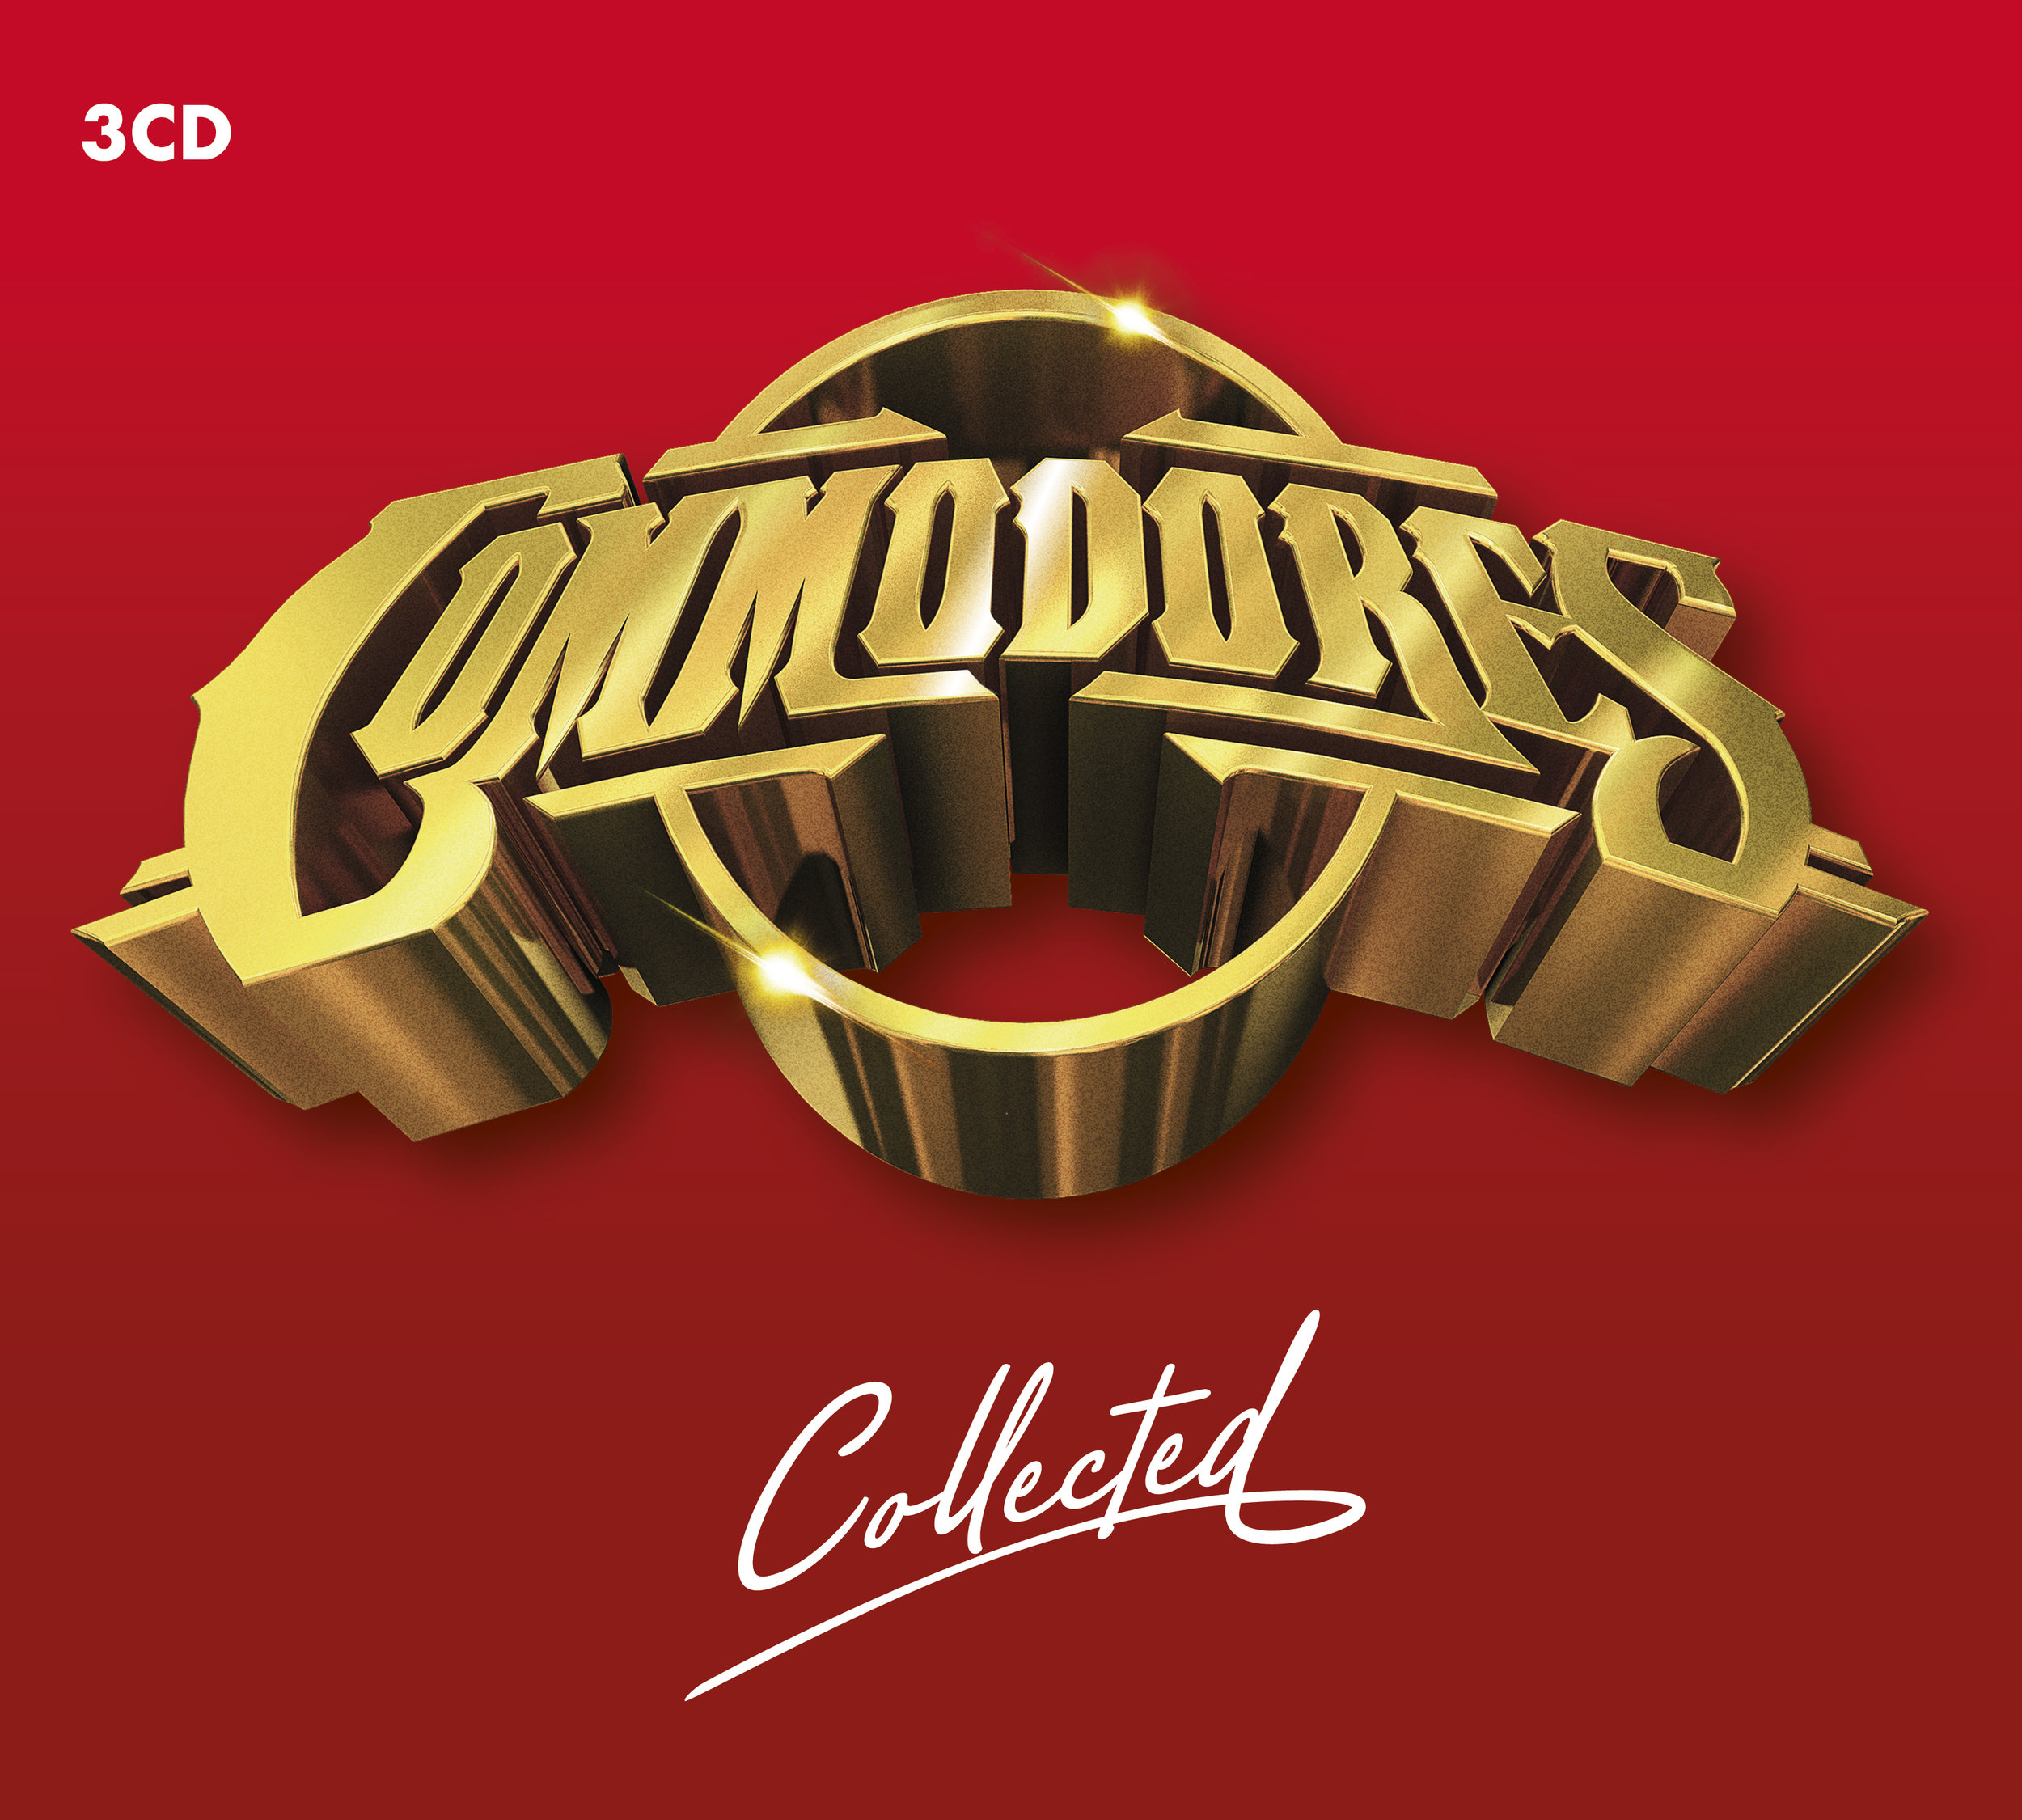 Best collection 2. Guy buddy "Sweet Tea". Commodores символ. Лейбл: Universal Music. Commodores "Nightshift".